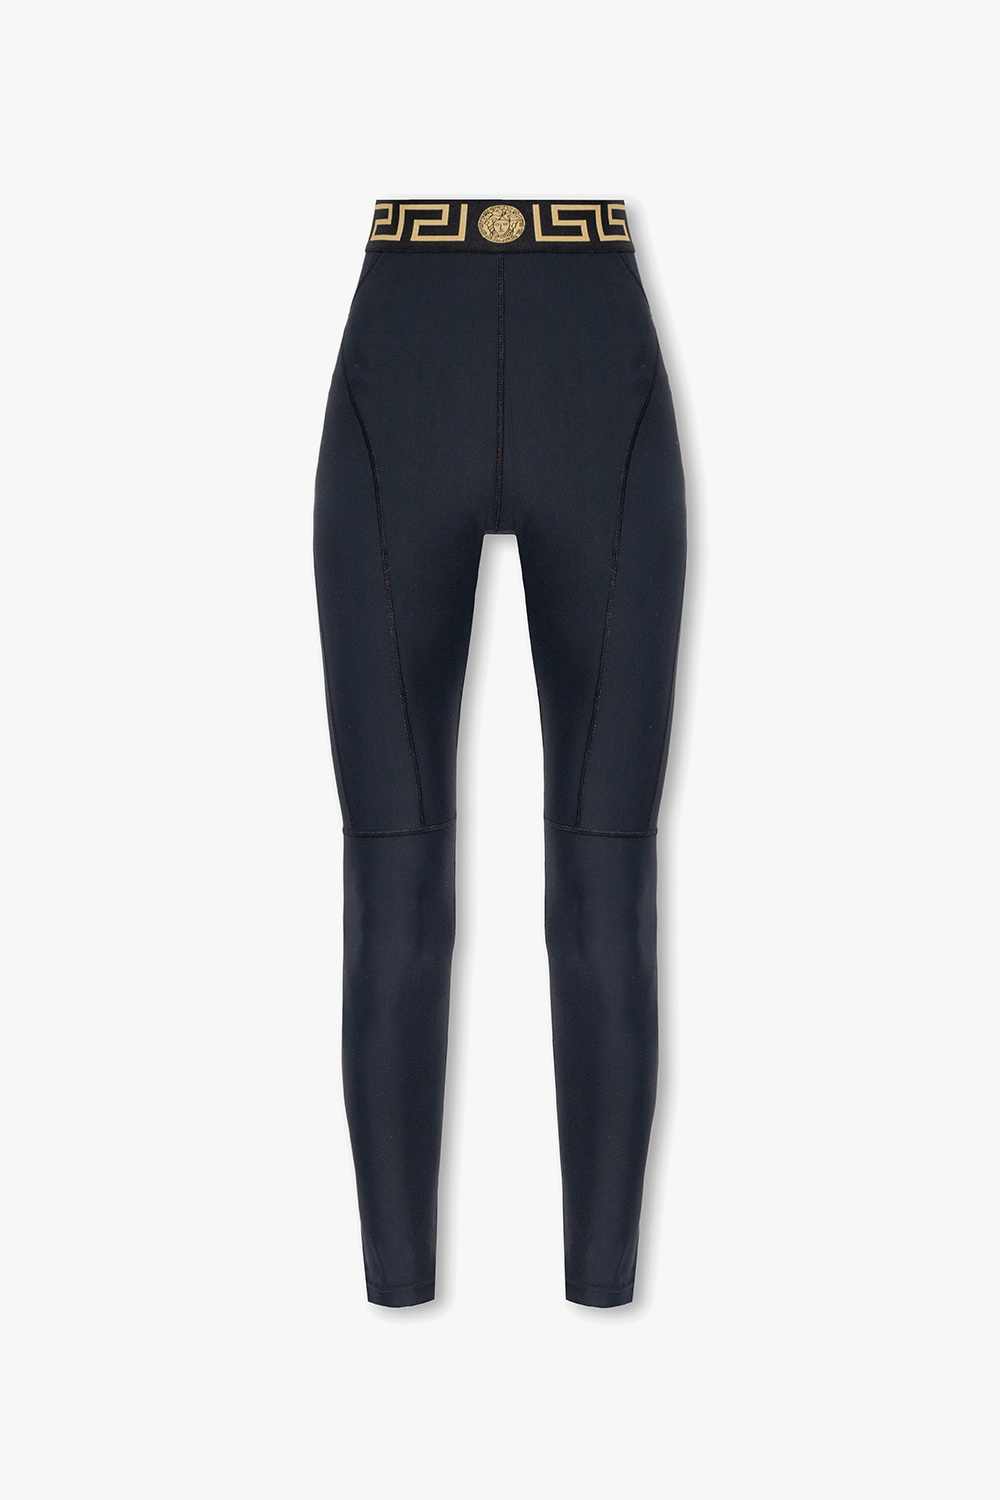 adidas Performance ASTRO PANT WIND - Tracksuit bottoms - black